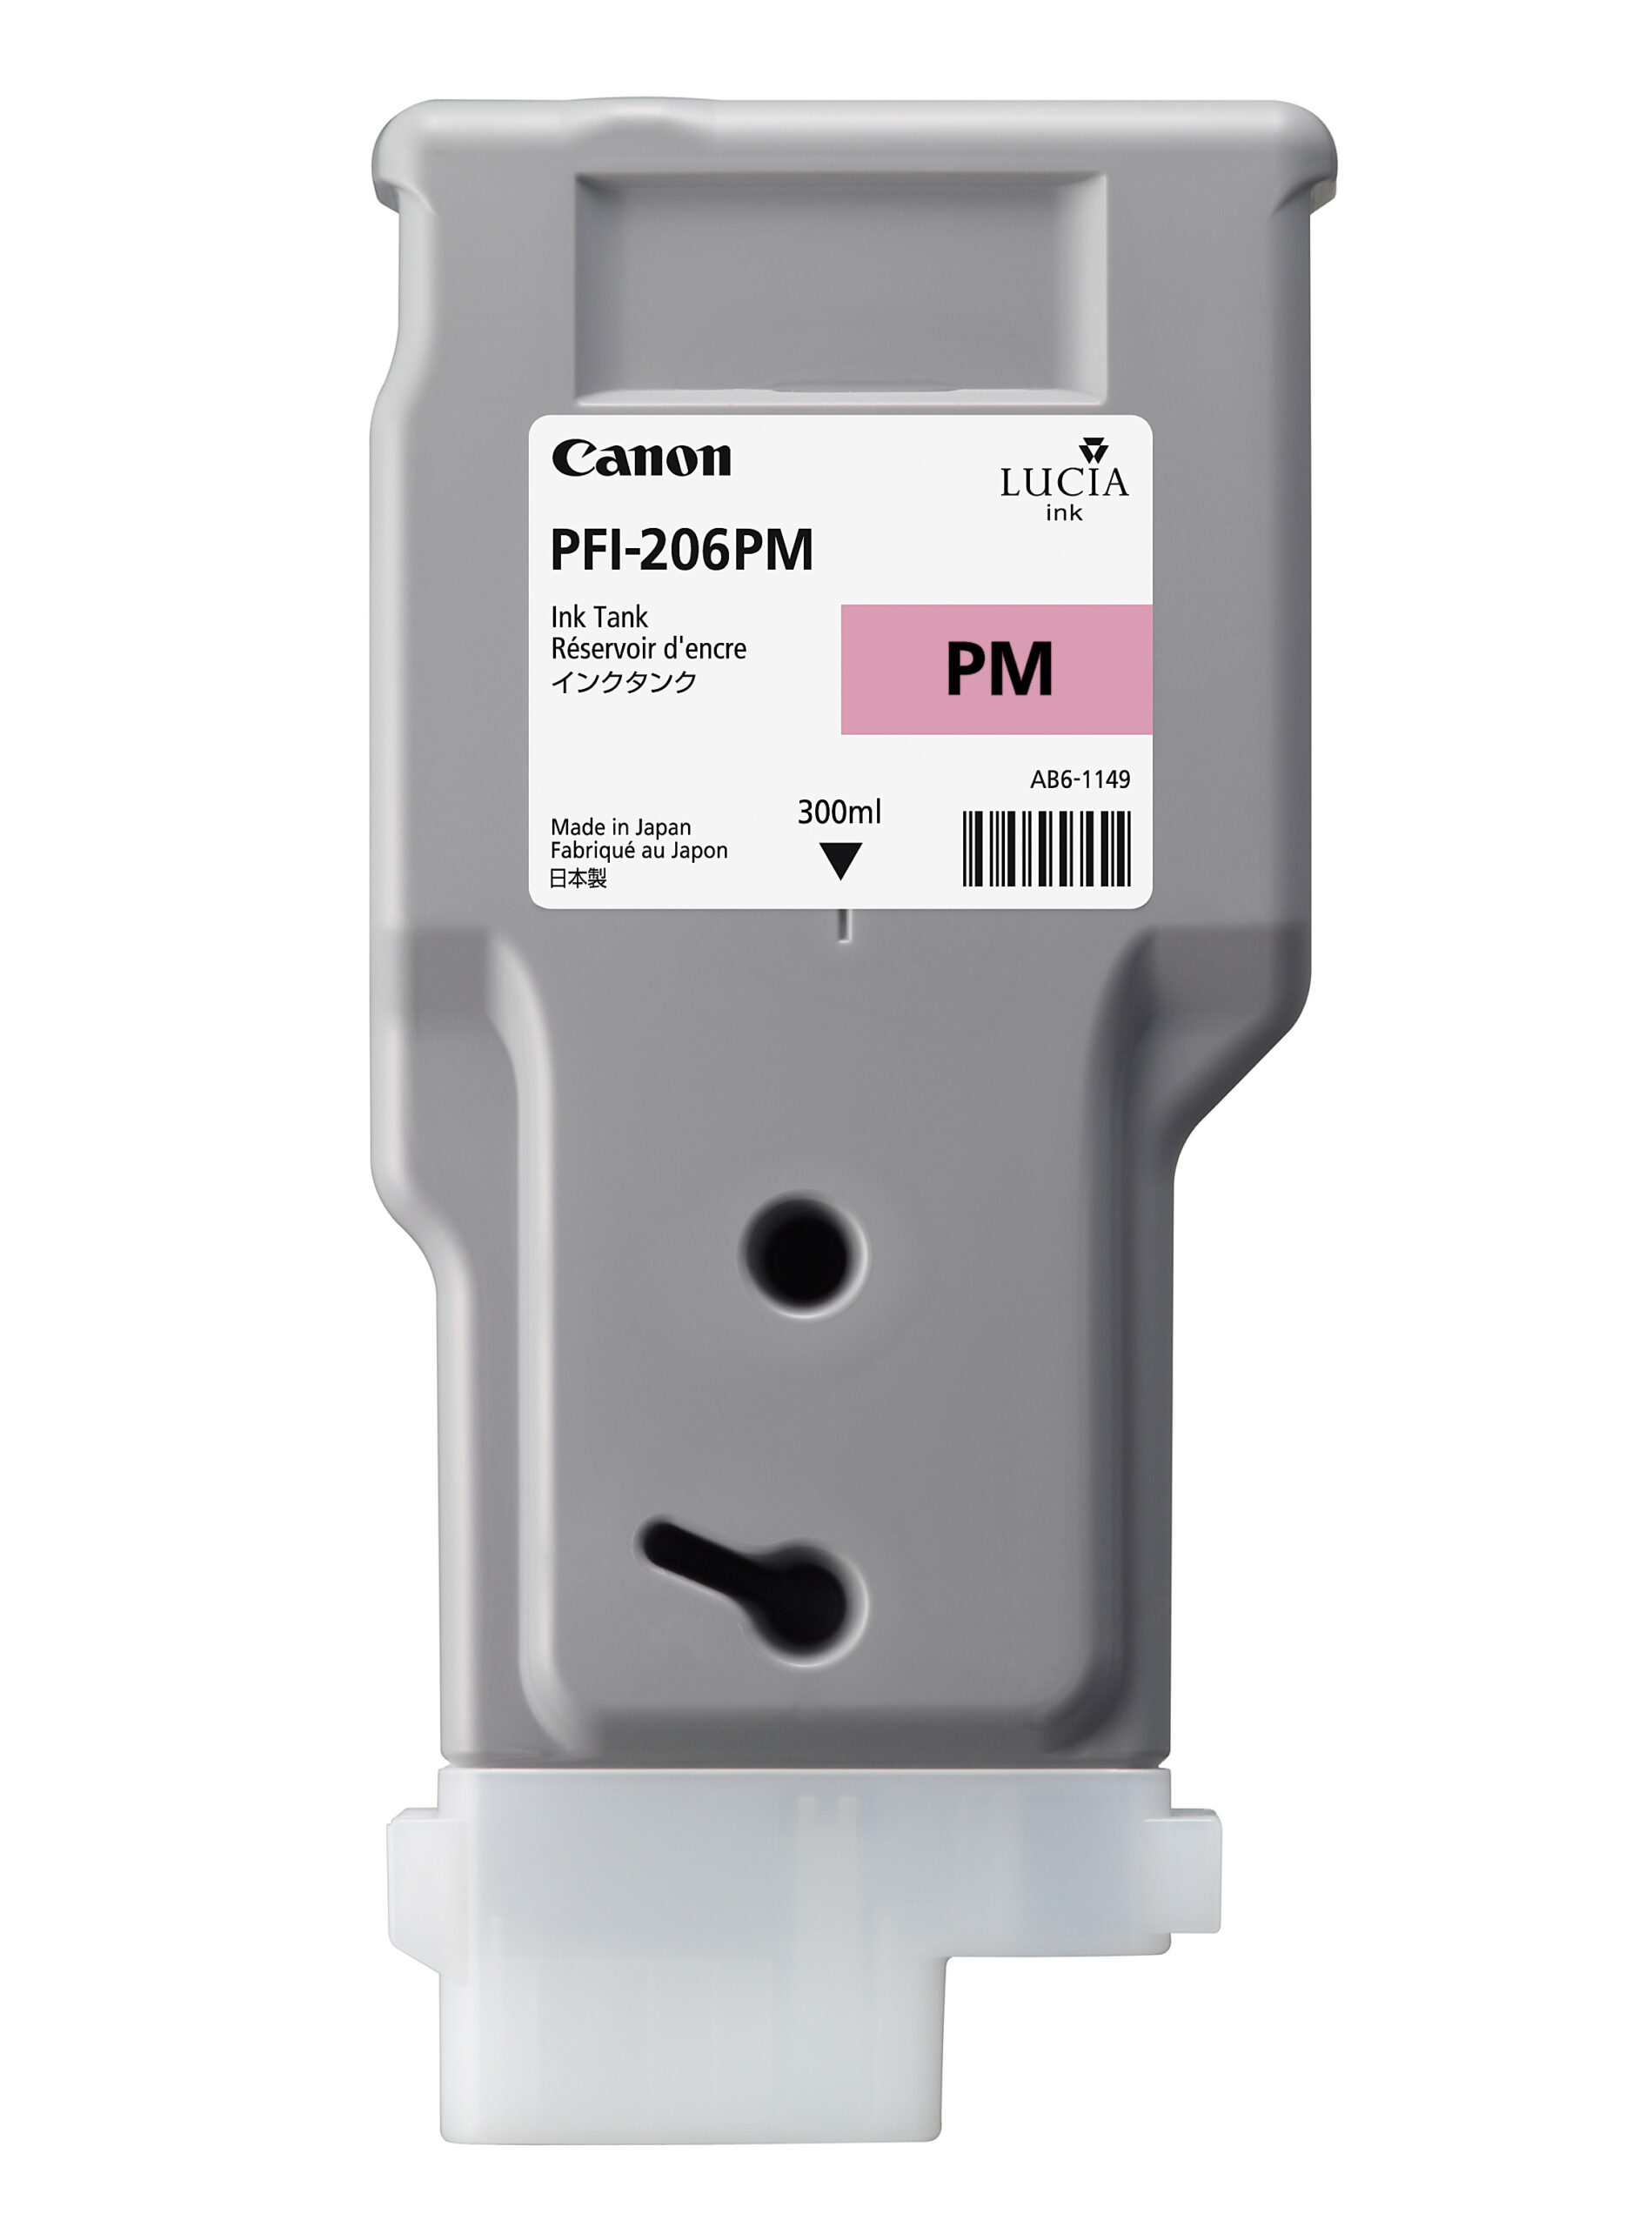 Canon PFI-206PM Printer Ink Cartridge - Photo Magenta Ink Tank - 300ml - 5308B001AA - for Canon iPF6400, iPF6400S, iPF6450 Printers - express delivery from GDS - Graphic Design Supplies Ltd